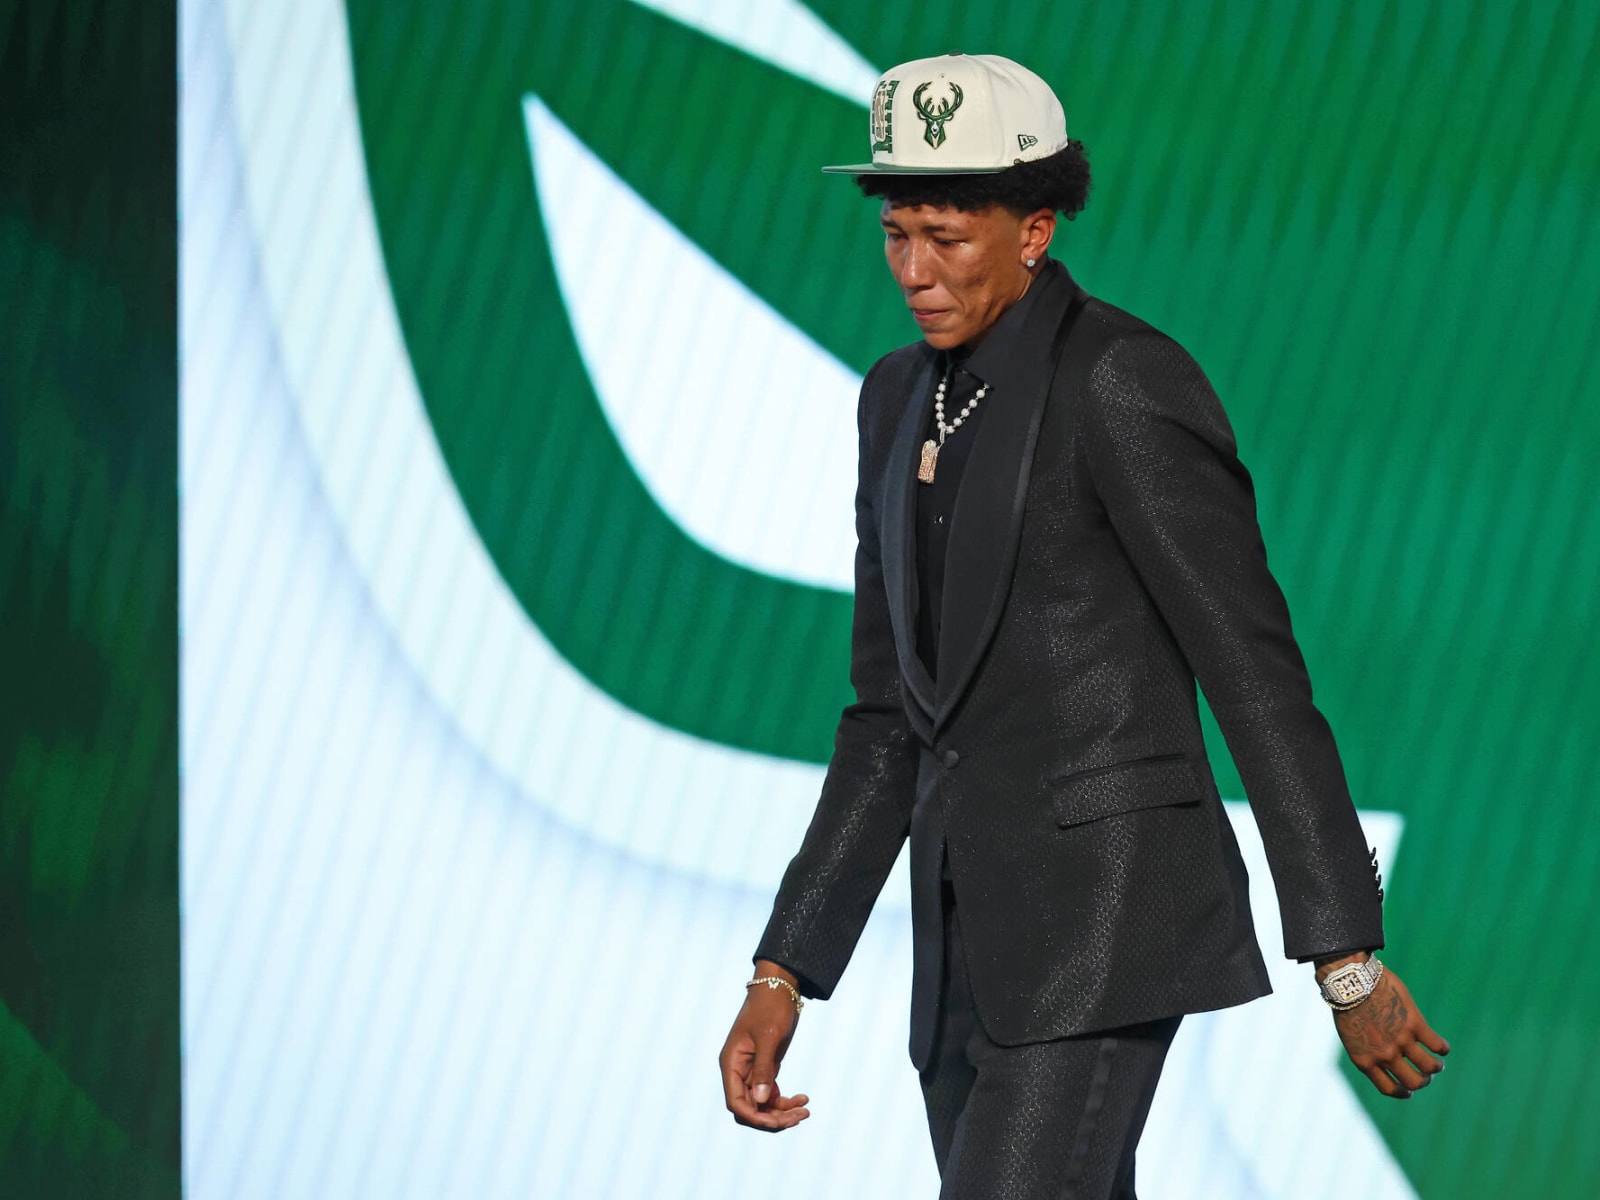 WATCH: Bucks' Rookie MarJon Beauchamp Buys His Mother a House